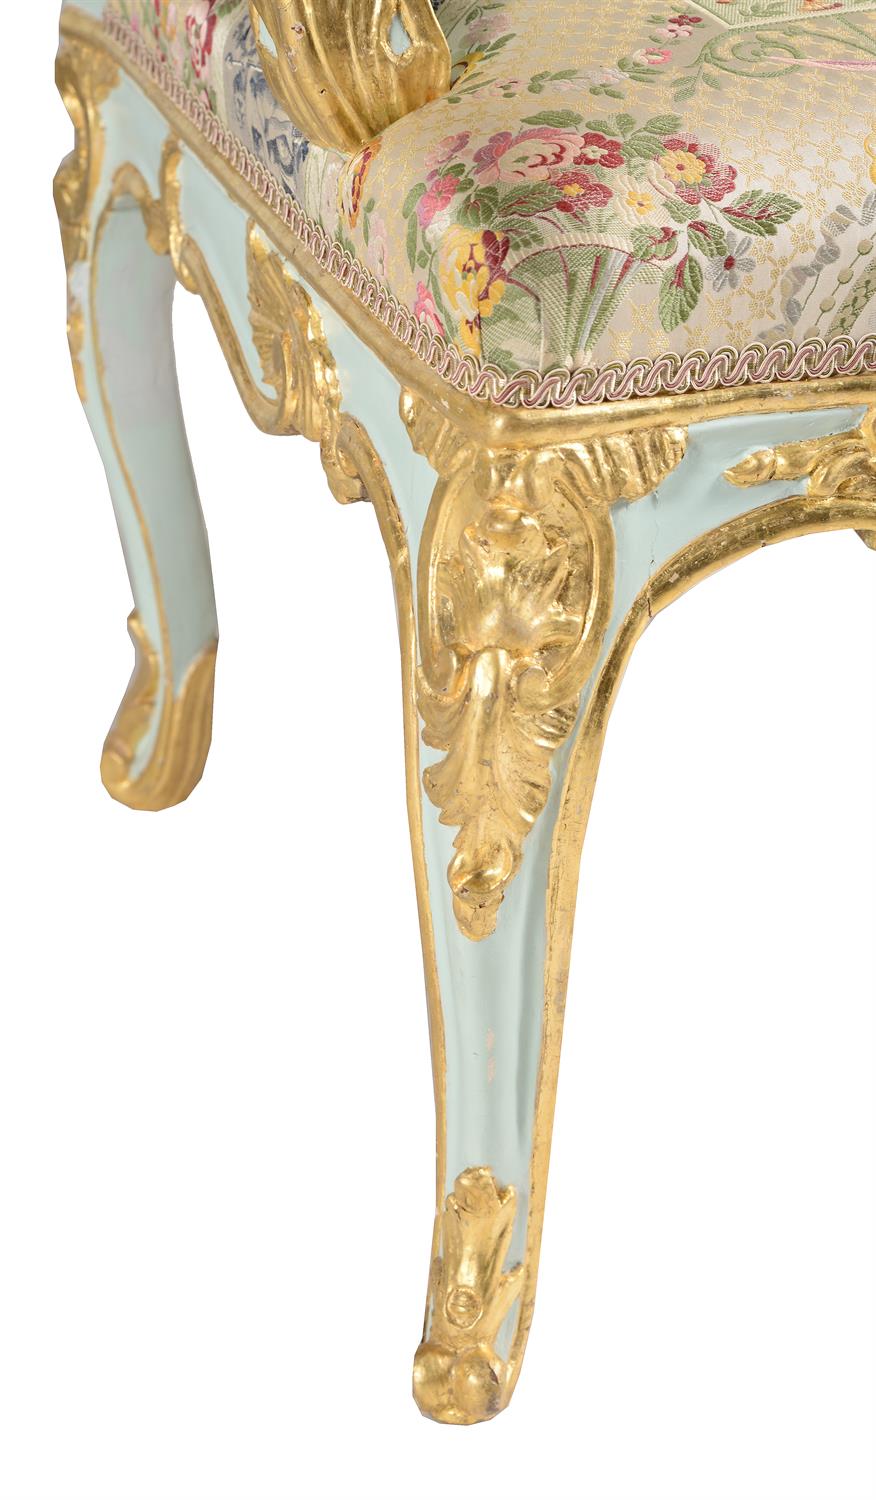 A pair of Italian carved wood, painted and parcel gilt armchairs, mid 18th century - Image 6 of 8